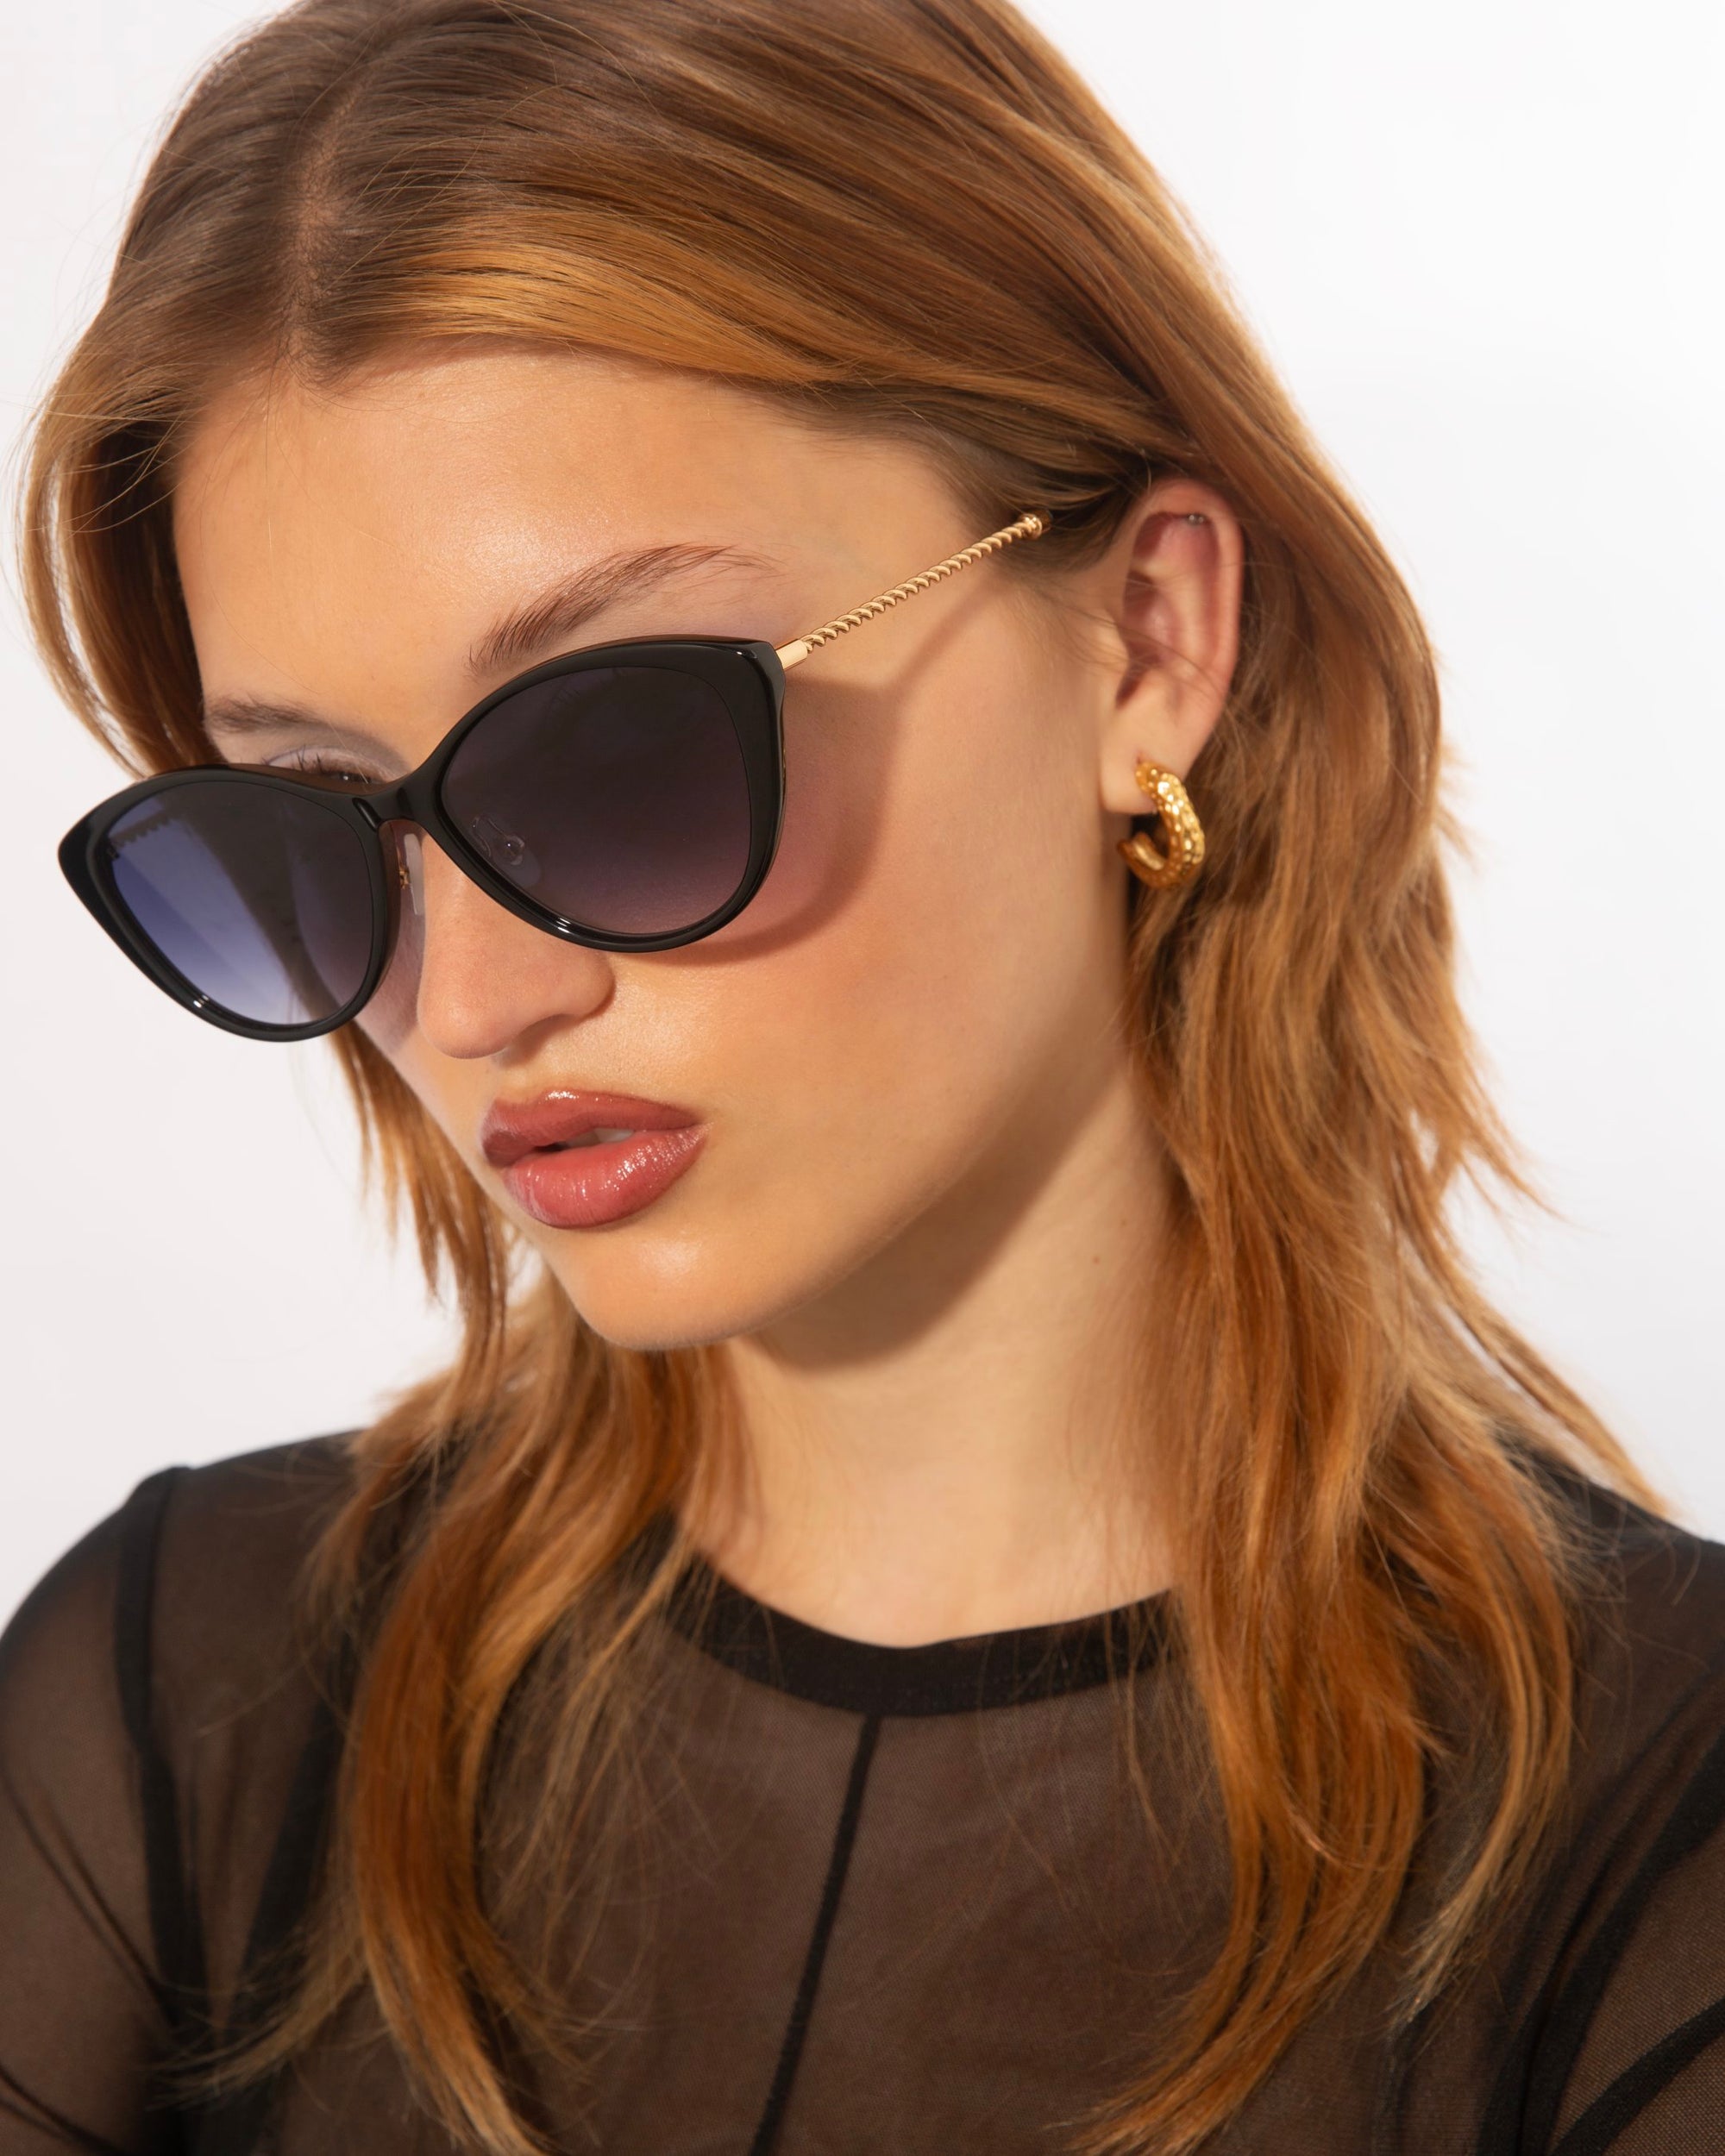 A person with long, auburn hair and wearing a black sheer top and black cat-eye sunglasses featuring jade-stone nose pads by For Art's Sake® Perla II is looking down. They have gold hoop earrings and a slightly serious expression. The background is plain white.